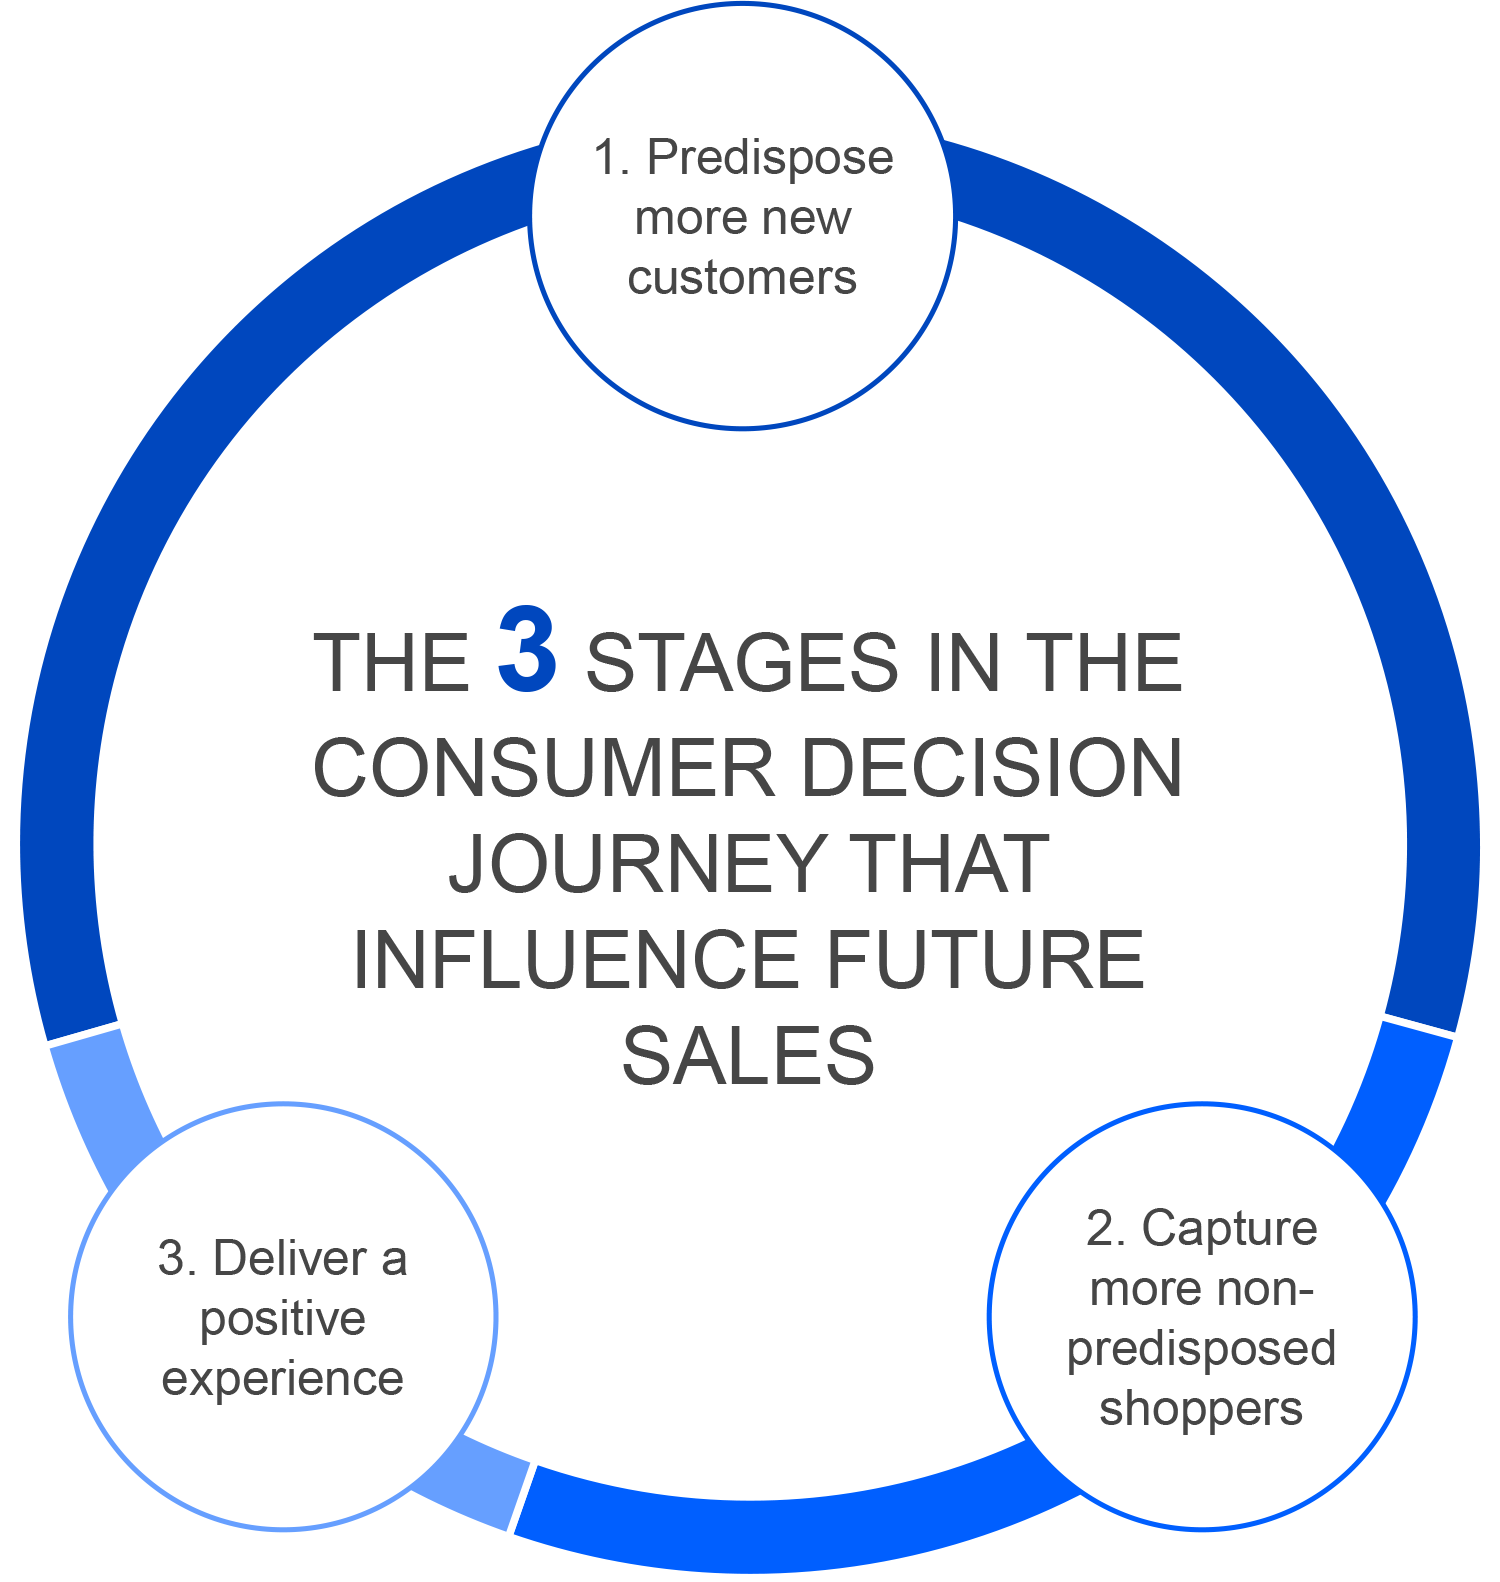 The greatest impact on future sales comes from predisposing new customers